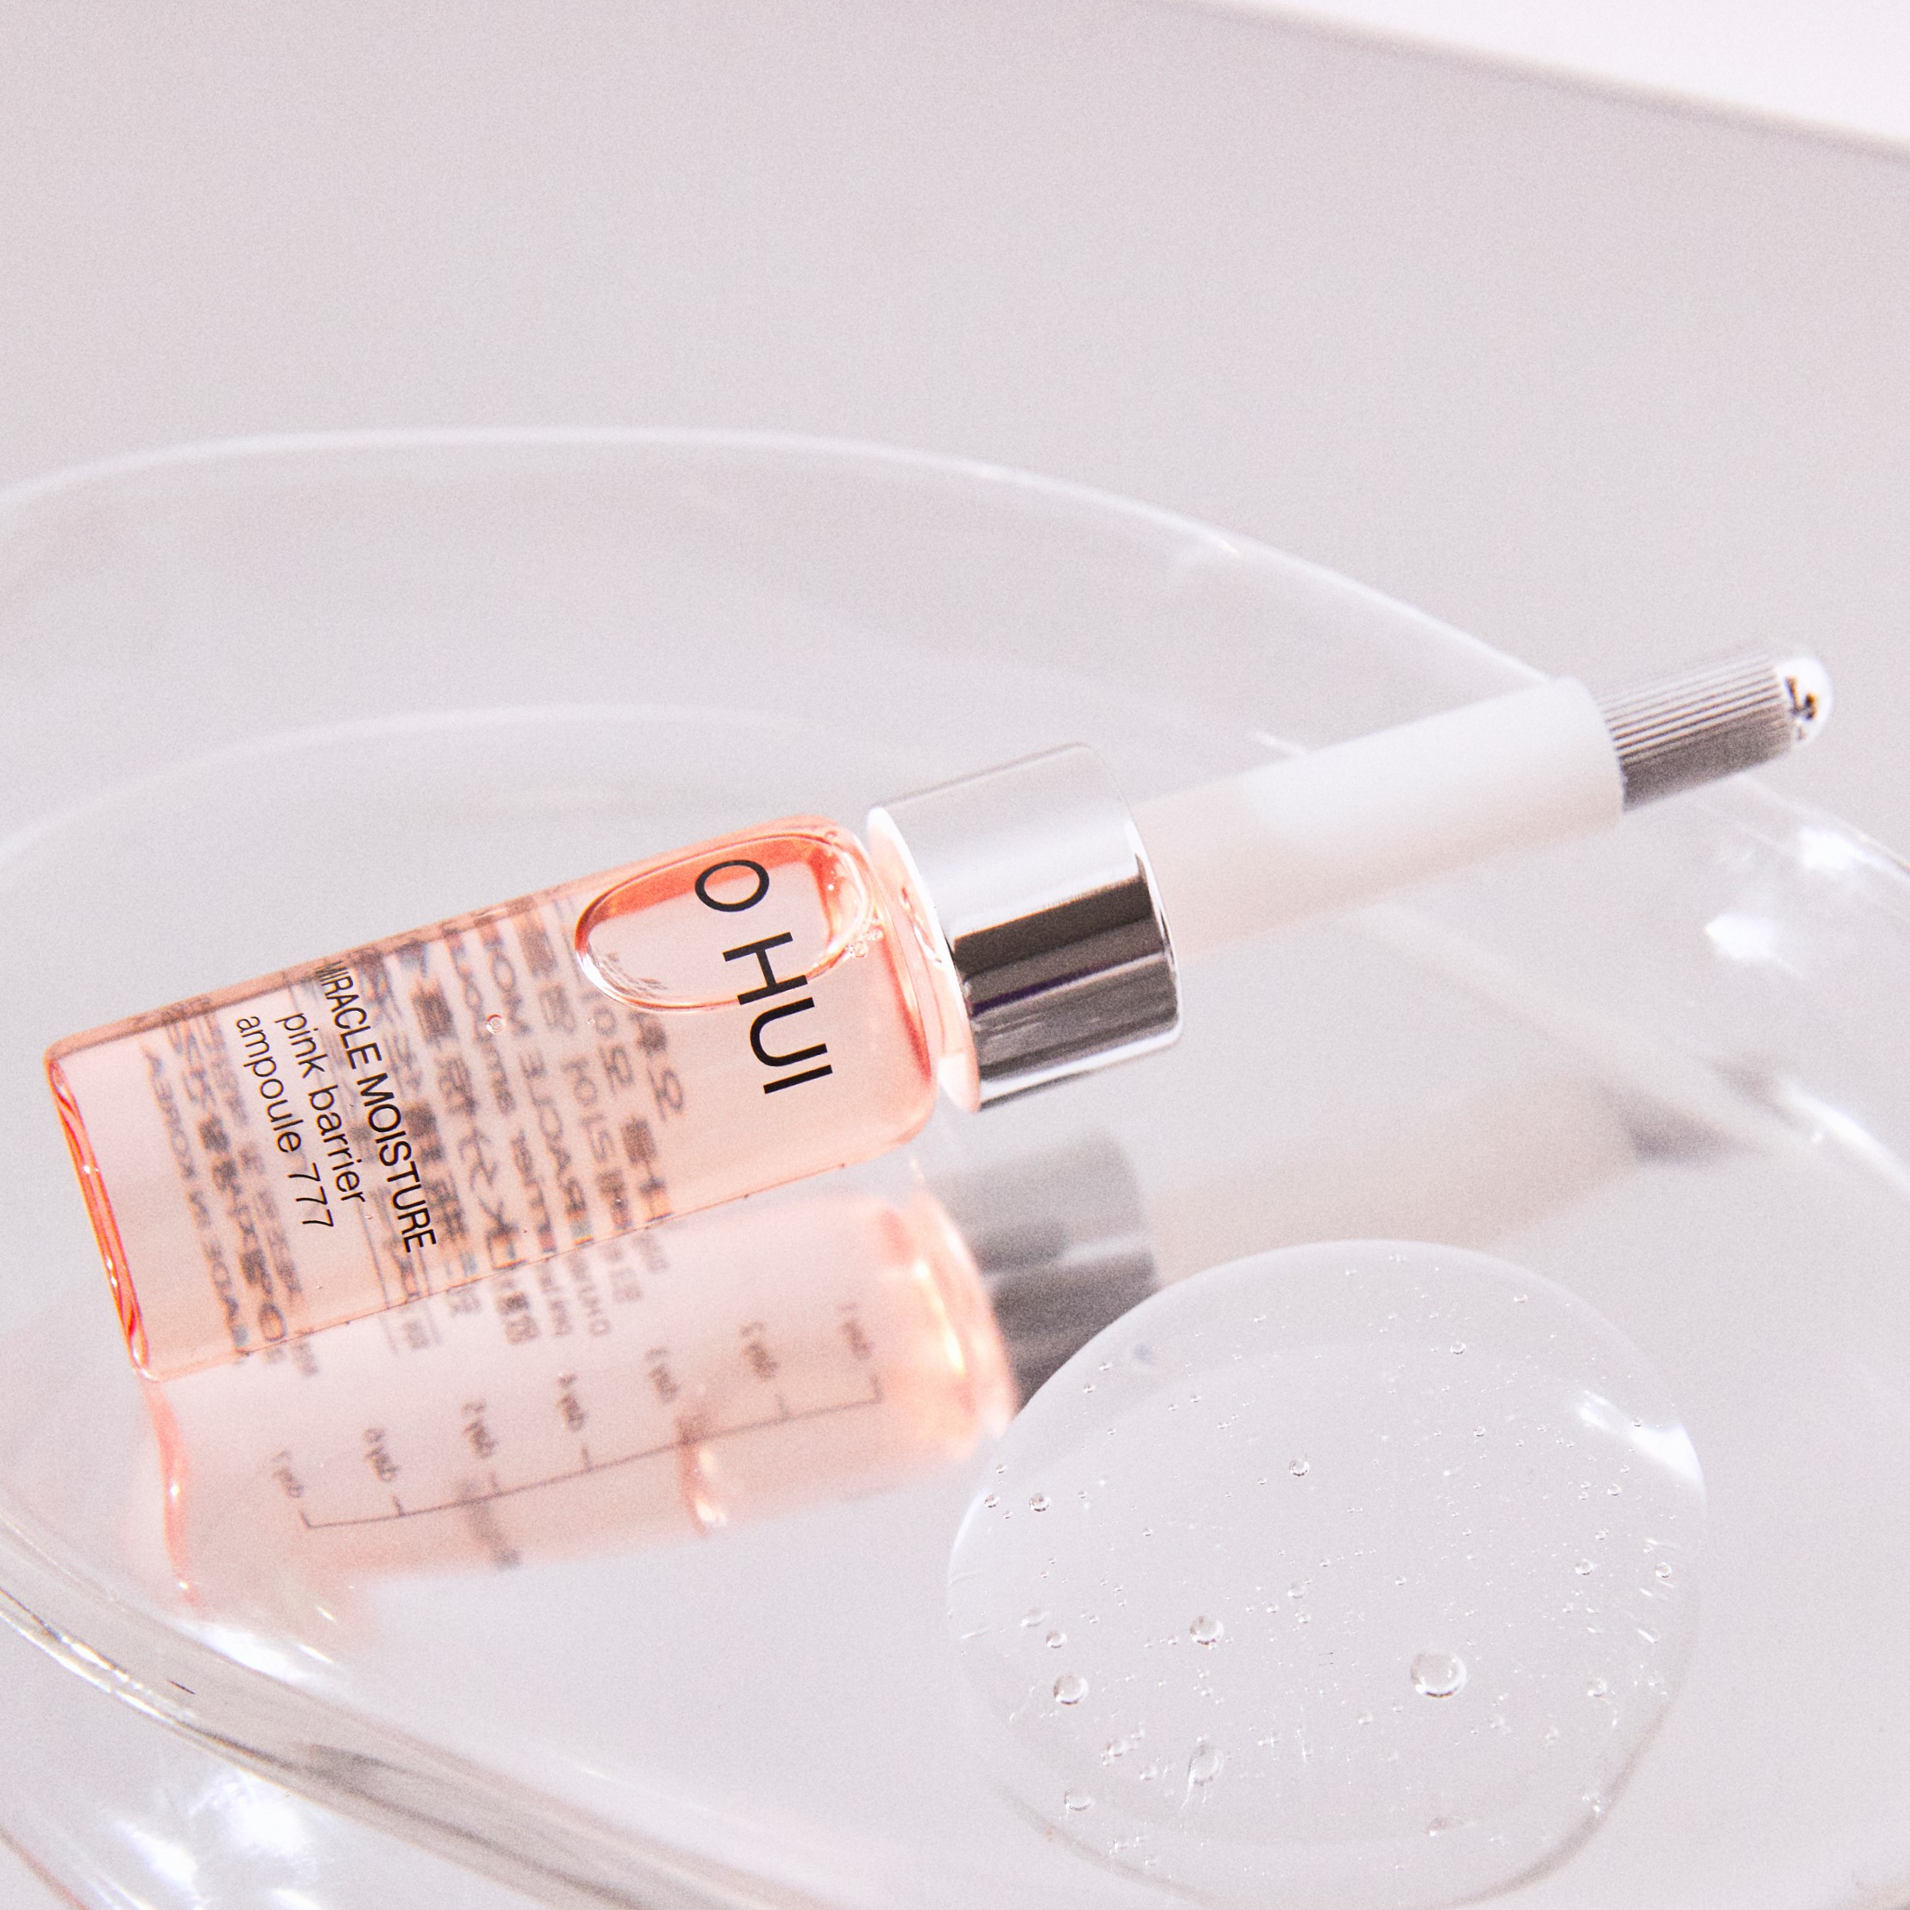 A bottle of OHUI Miracle Moisture 777 Serum on a surface with a drop of texture next to it on a surface.